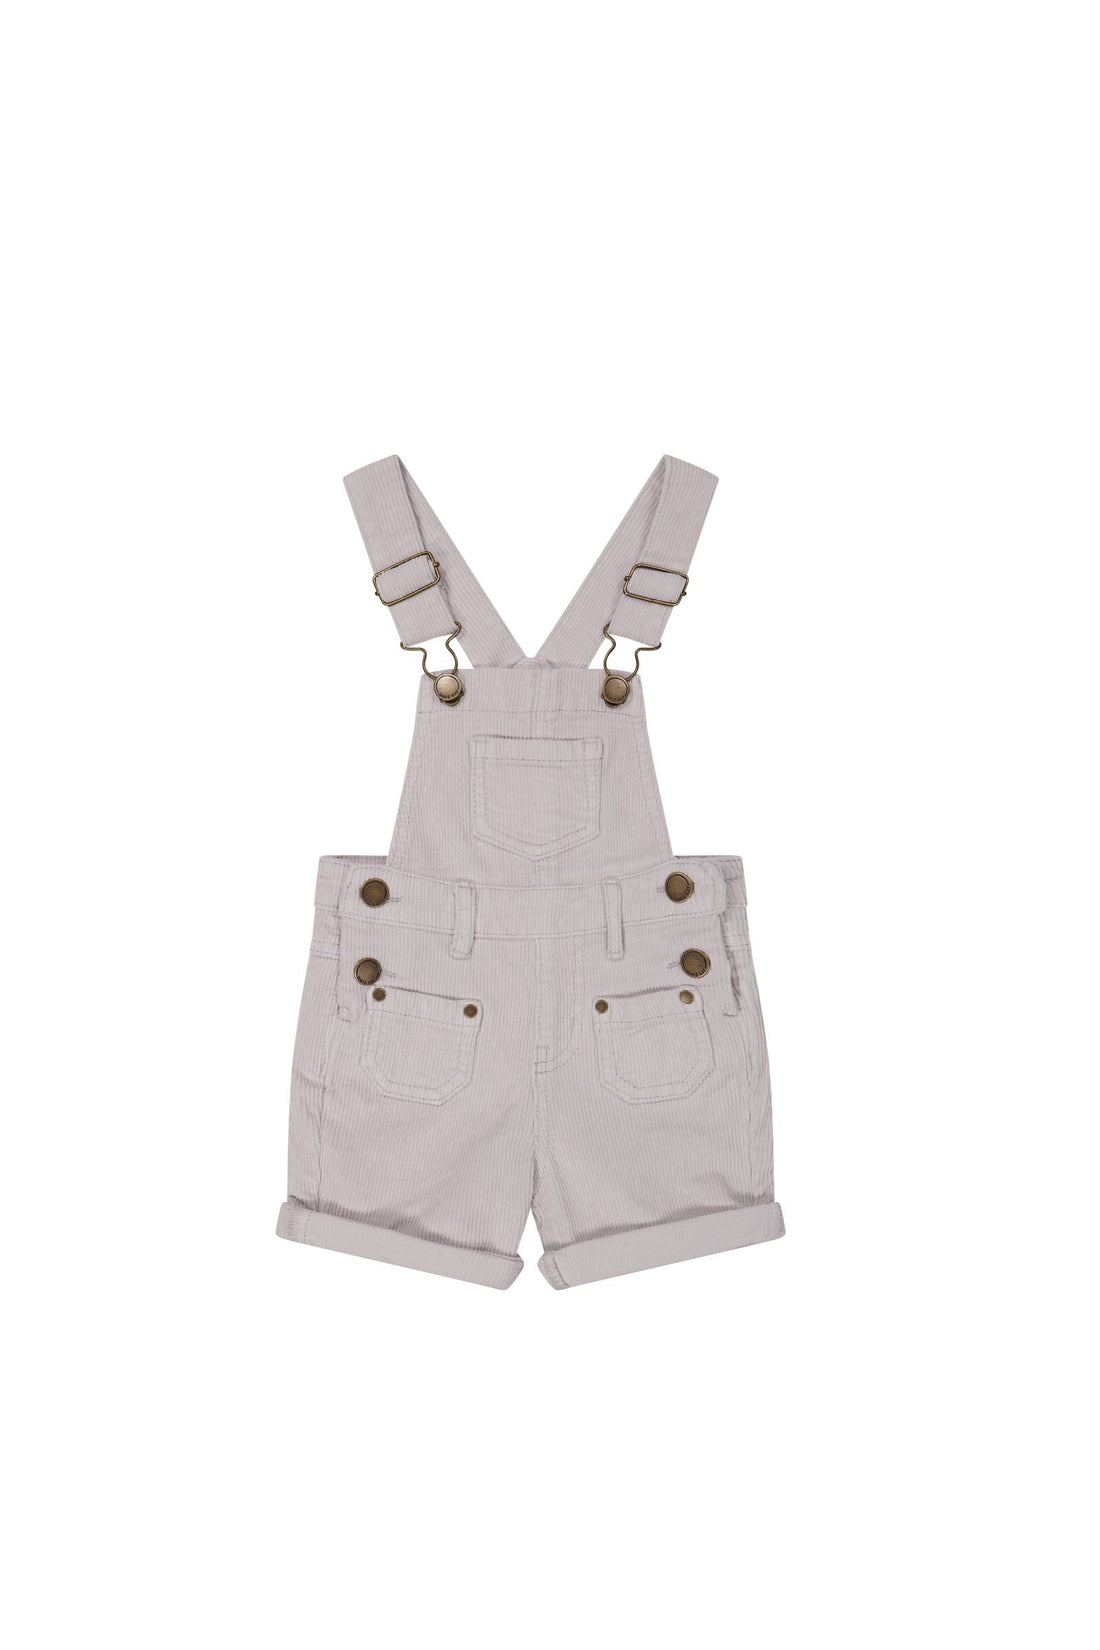 Jamie Kay Chase Short Cord Overall in Blush